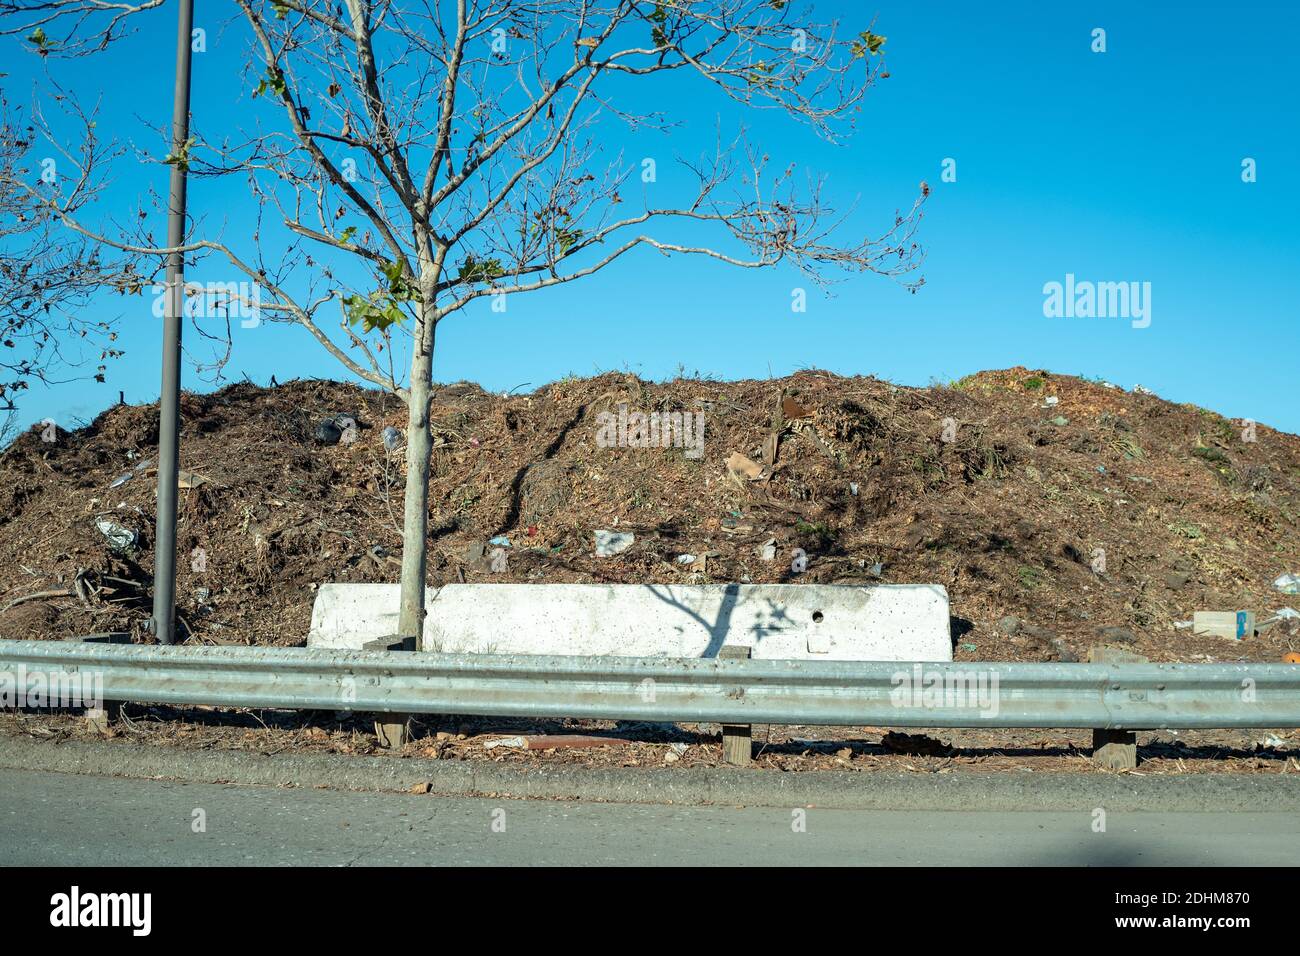 Large pile of organic waste is visible behind a barricade at organic waste dumping area of the Martinez Transfer Station municipal solid waste dump in Martinez, California, December, 2020. () Stock Photo